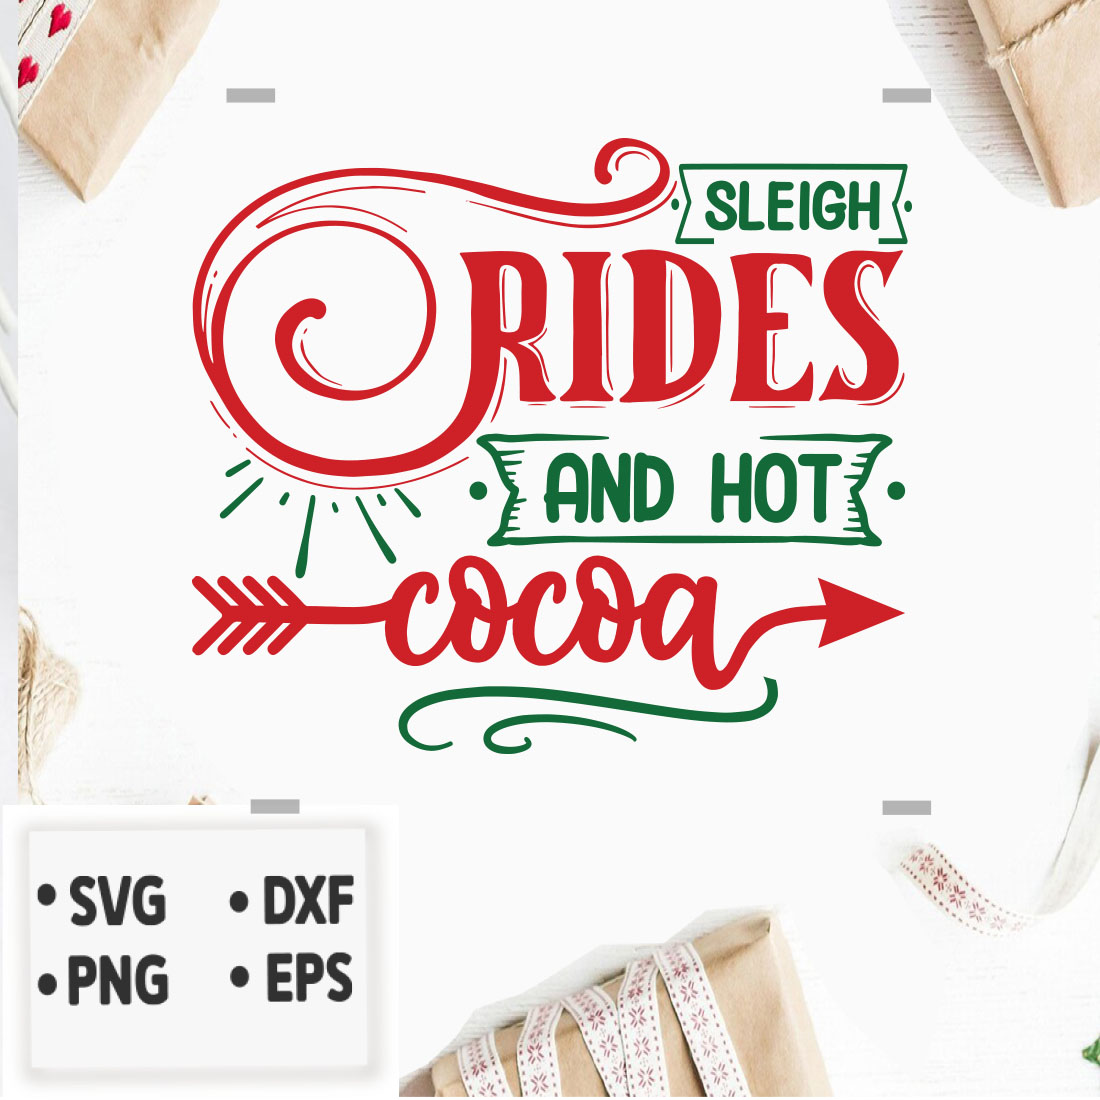 Image with irresistible prints of sleigh rides and hot cocoa.